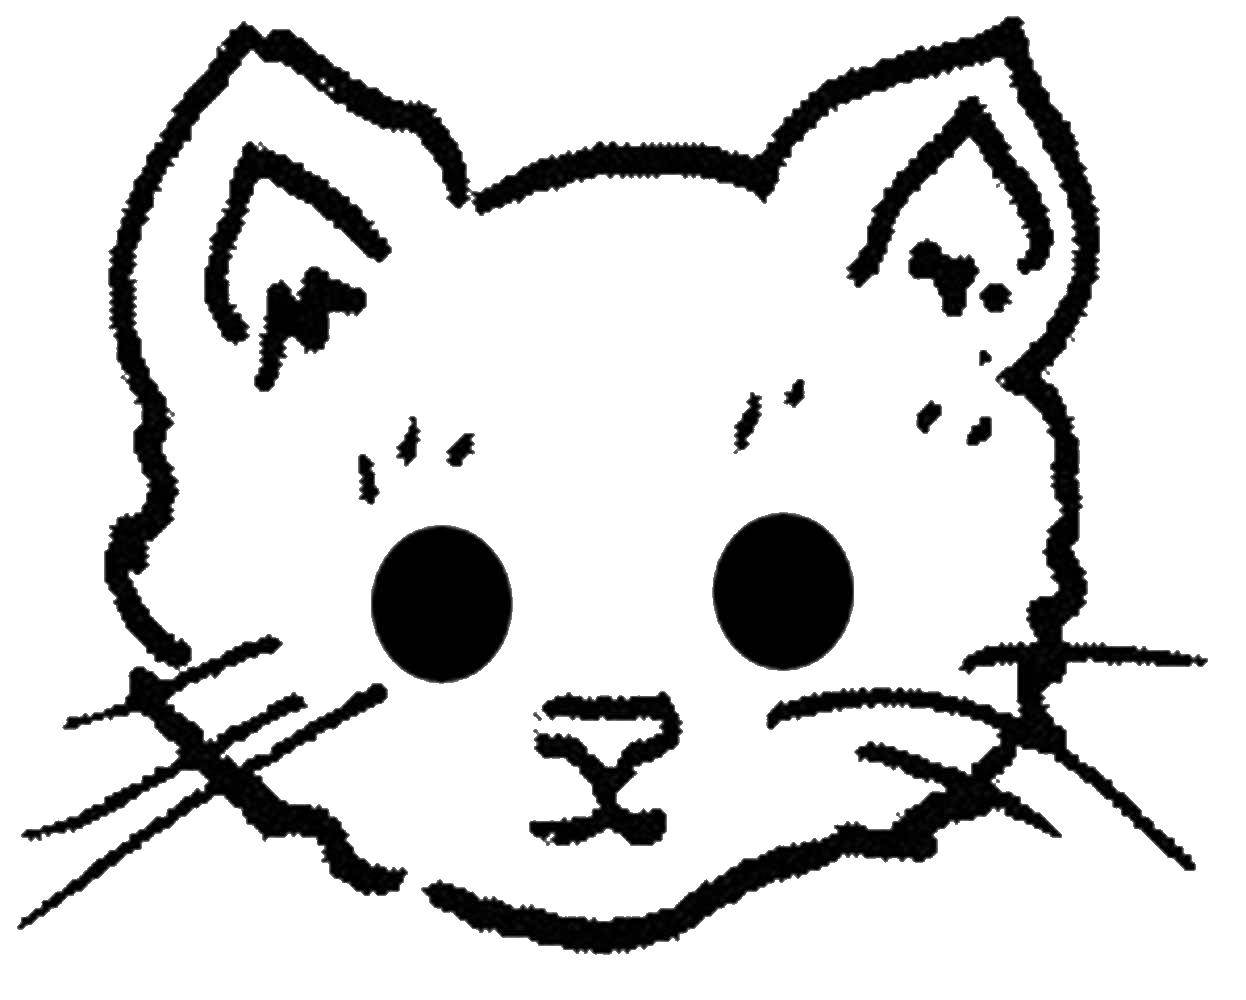 Coloring Cat. Category Animals. Tags:  the cat.